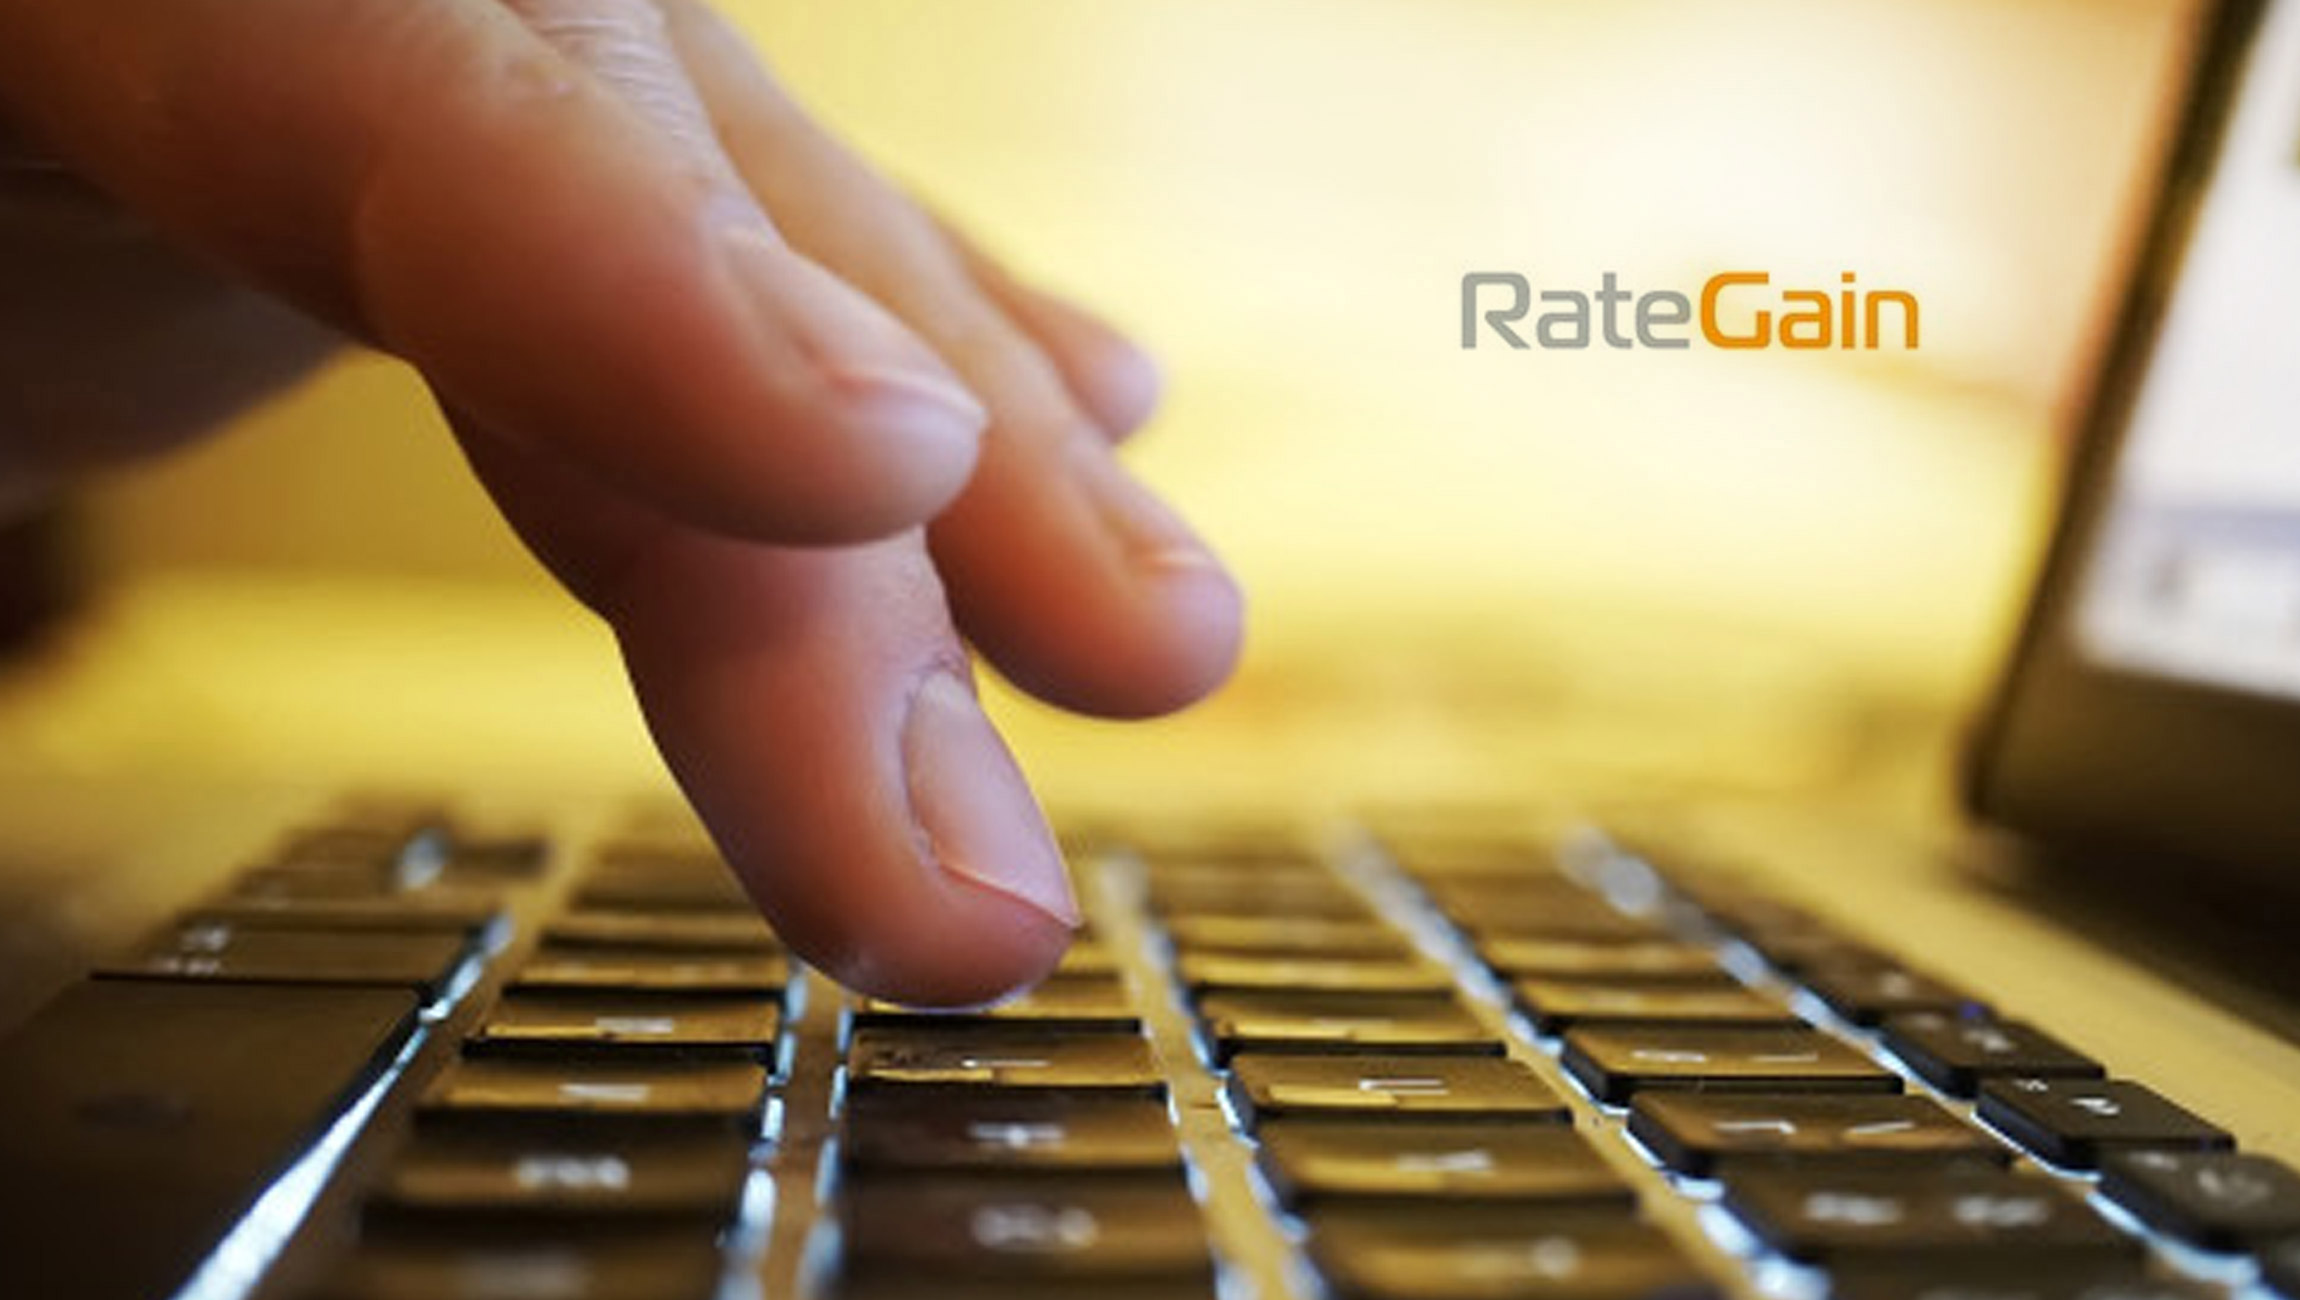 RateGain Strengthens Focus on Customer Success by Achieving Level III Global Support Certification